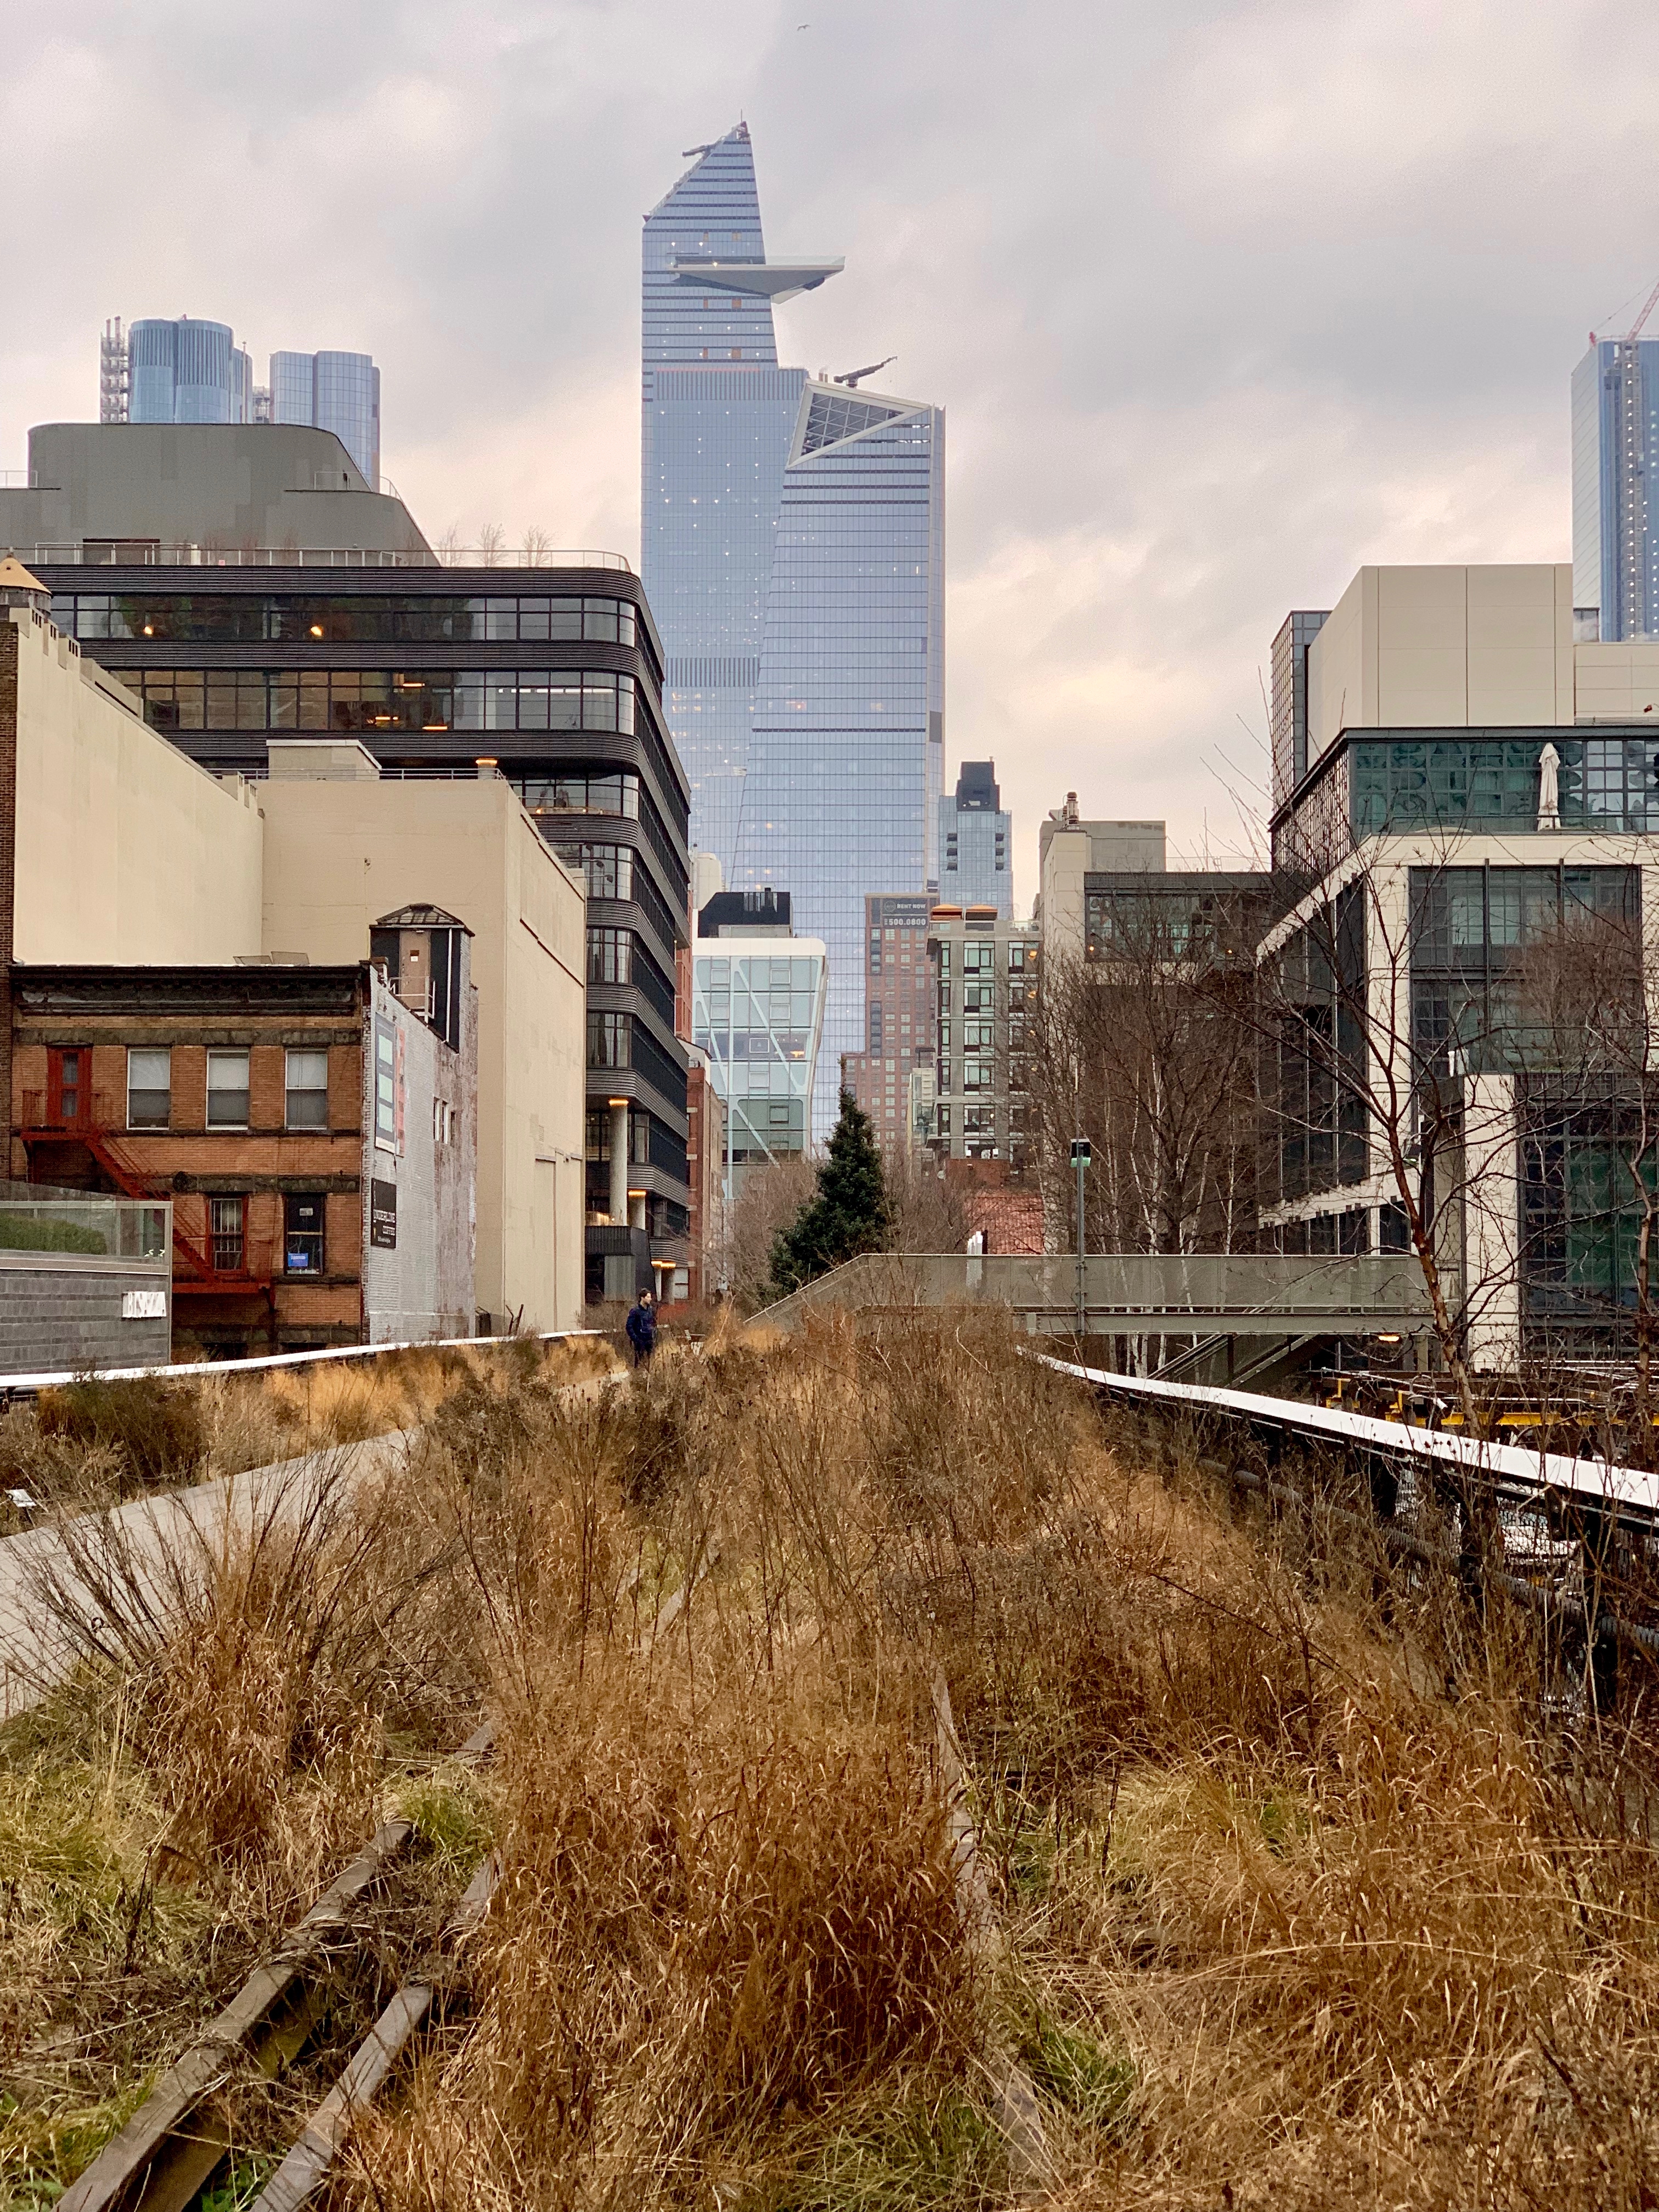 Drought tolerant native plant species populate the High Line. <a href="https://www.denari.co/hl23">HL23</a>, a building I've always admired, leans above the park in the distance.